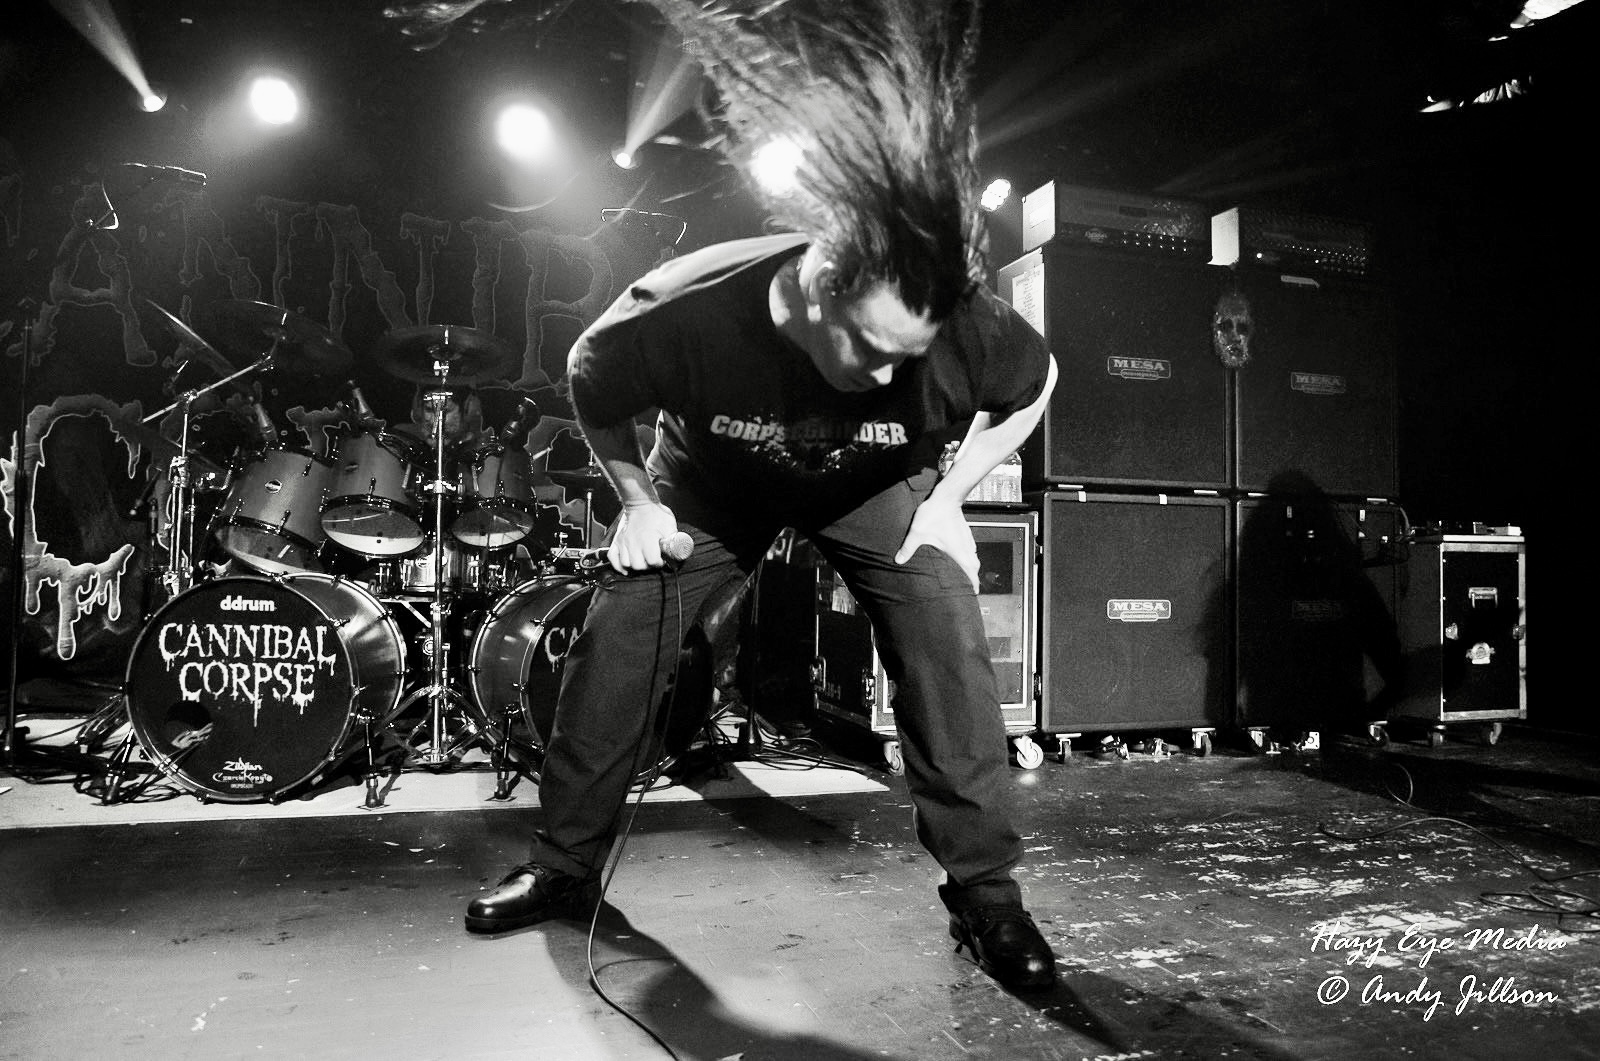 CANNIBAL CORPSE ‘HAMMER-SMASHES FACES’ IN BALTIMORE